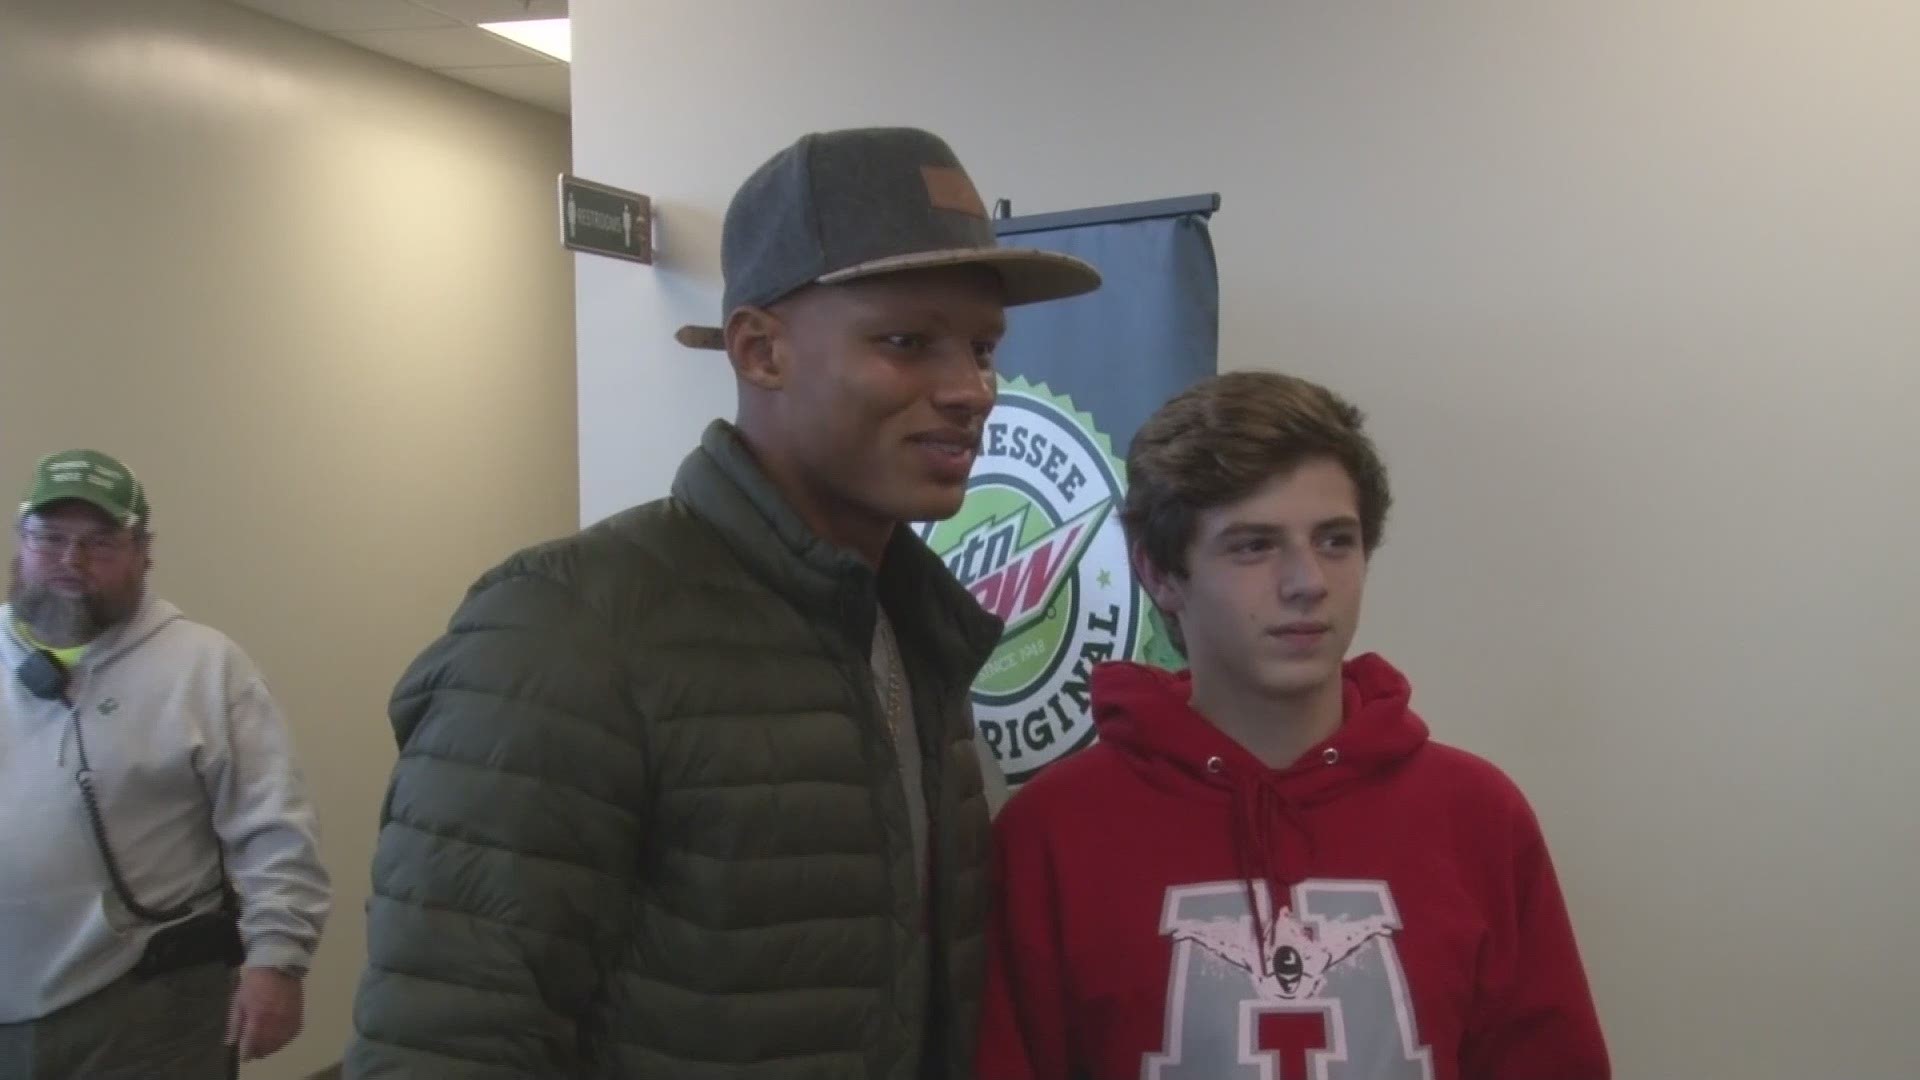 UT quarterback Josh Dobbs was among a group from UT to surprise evacuees and firefighters at a Gatlinburg shelter